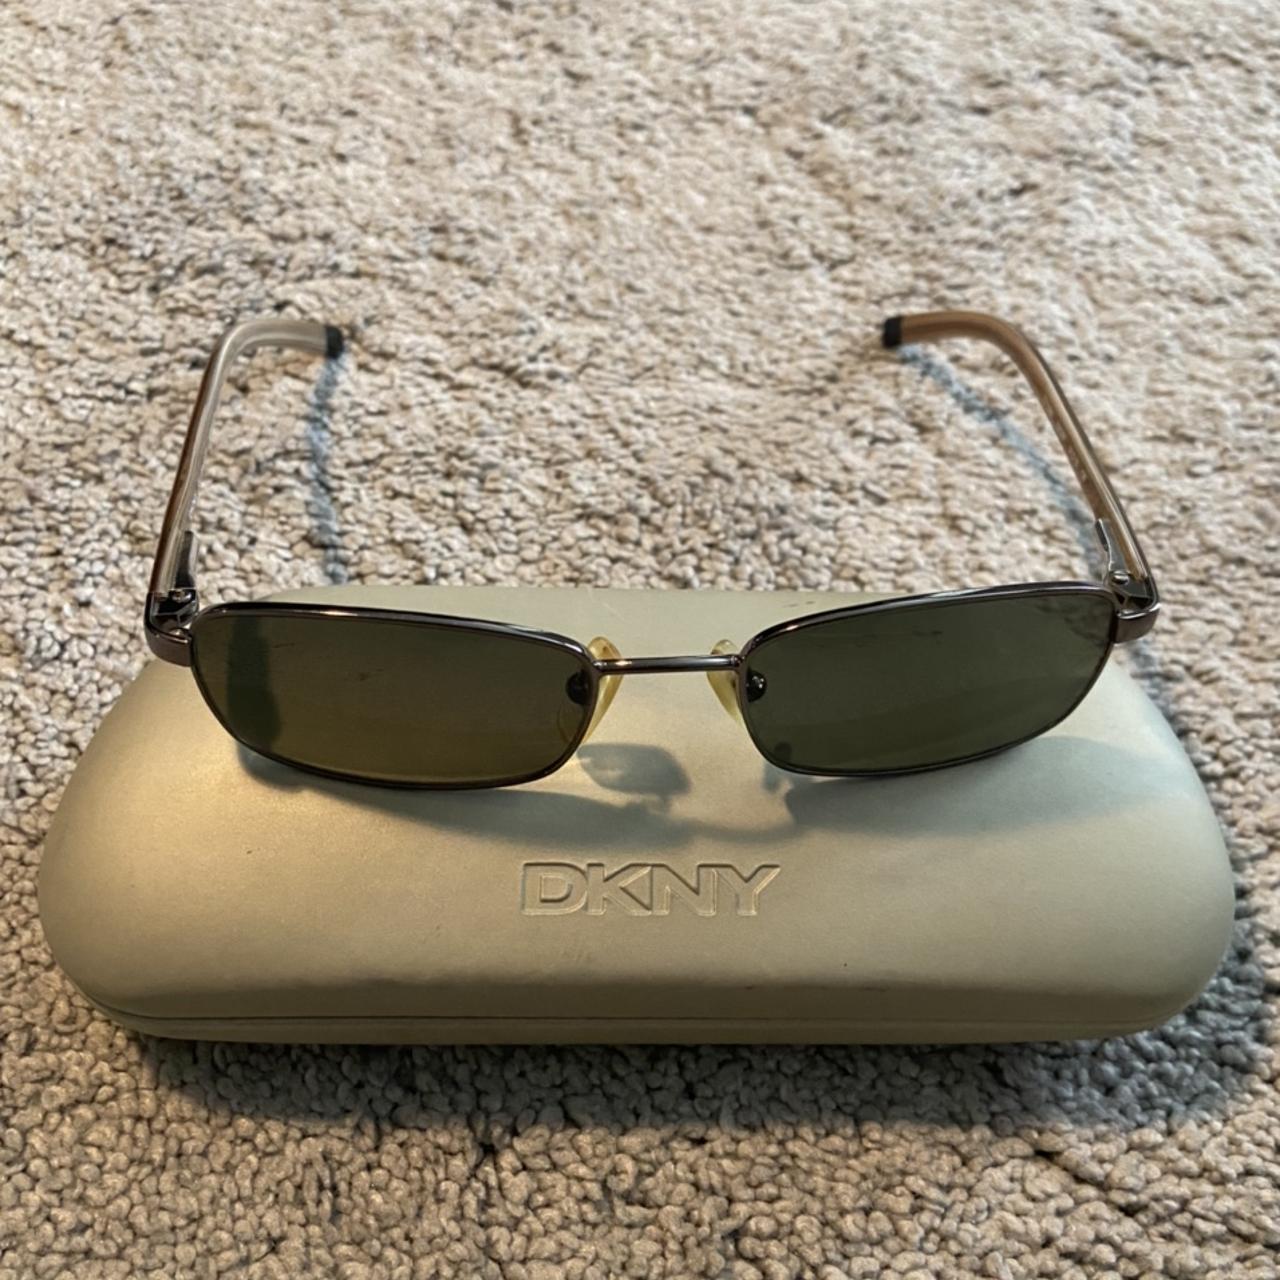 DKNY Women's Tan and Brown Sunglasses (3)